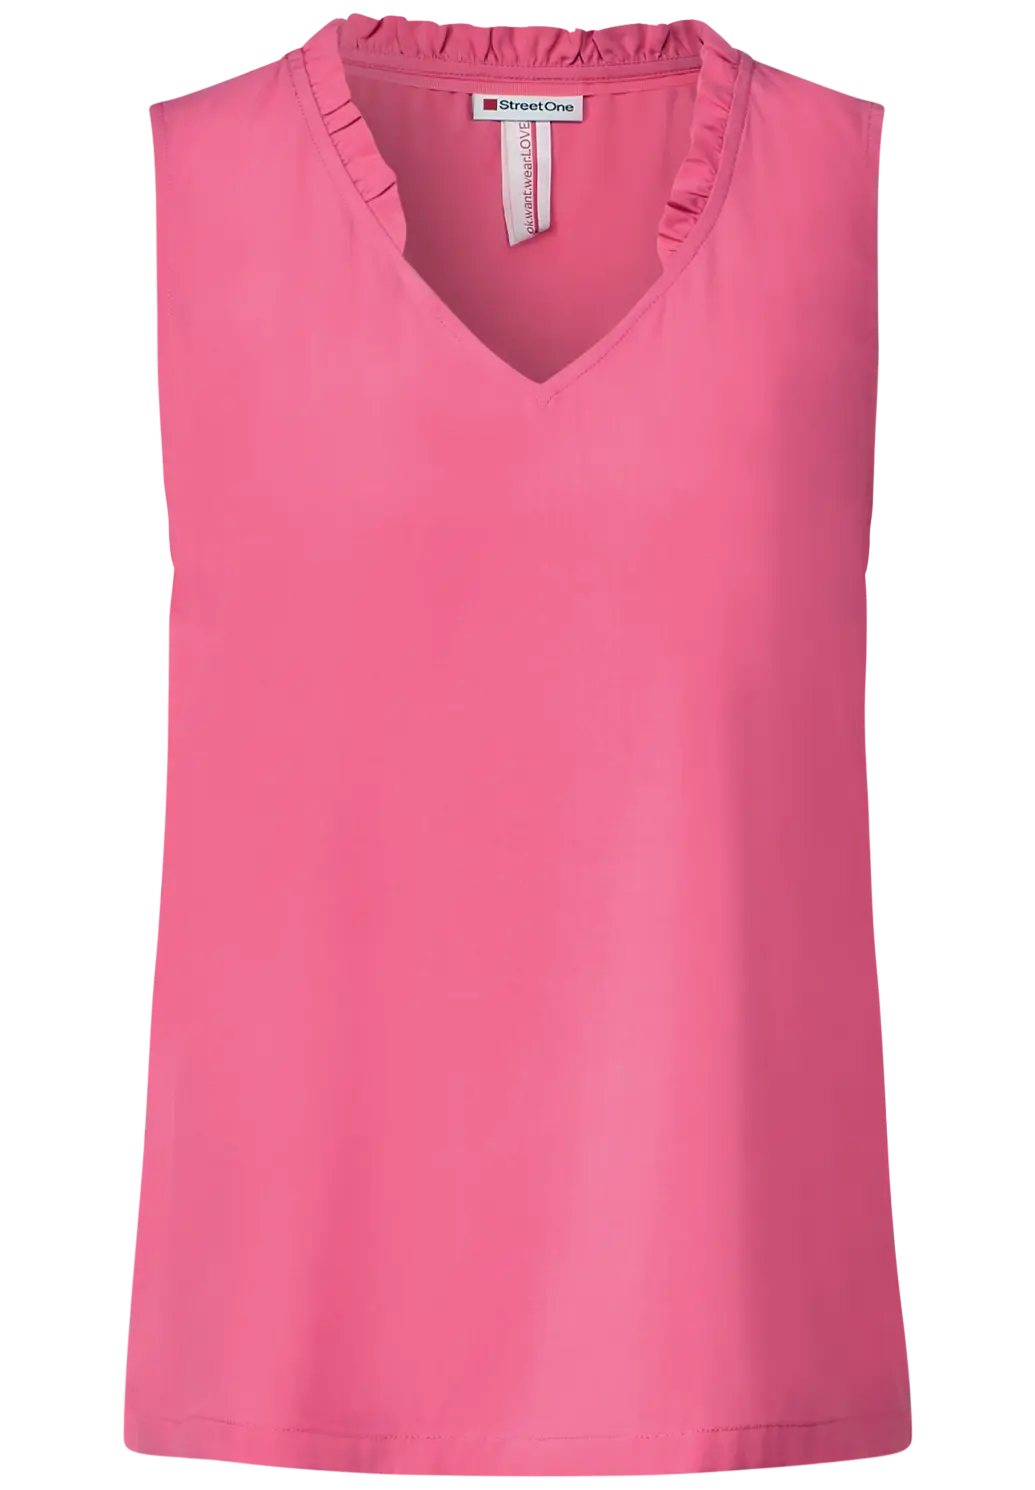 Pink v neck sleeveless blouse with frill detail Street One 344045 Pink